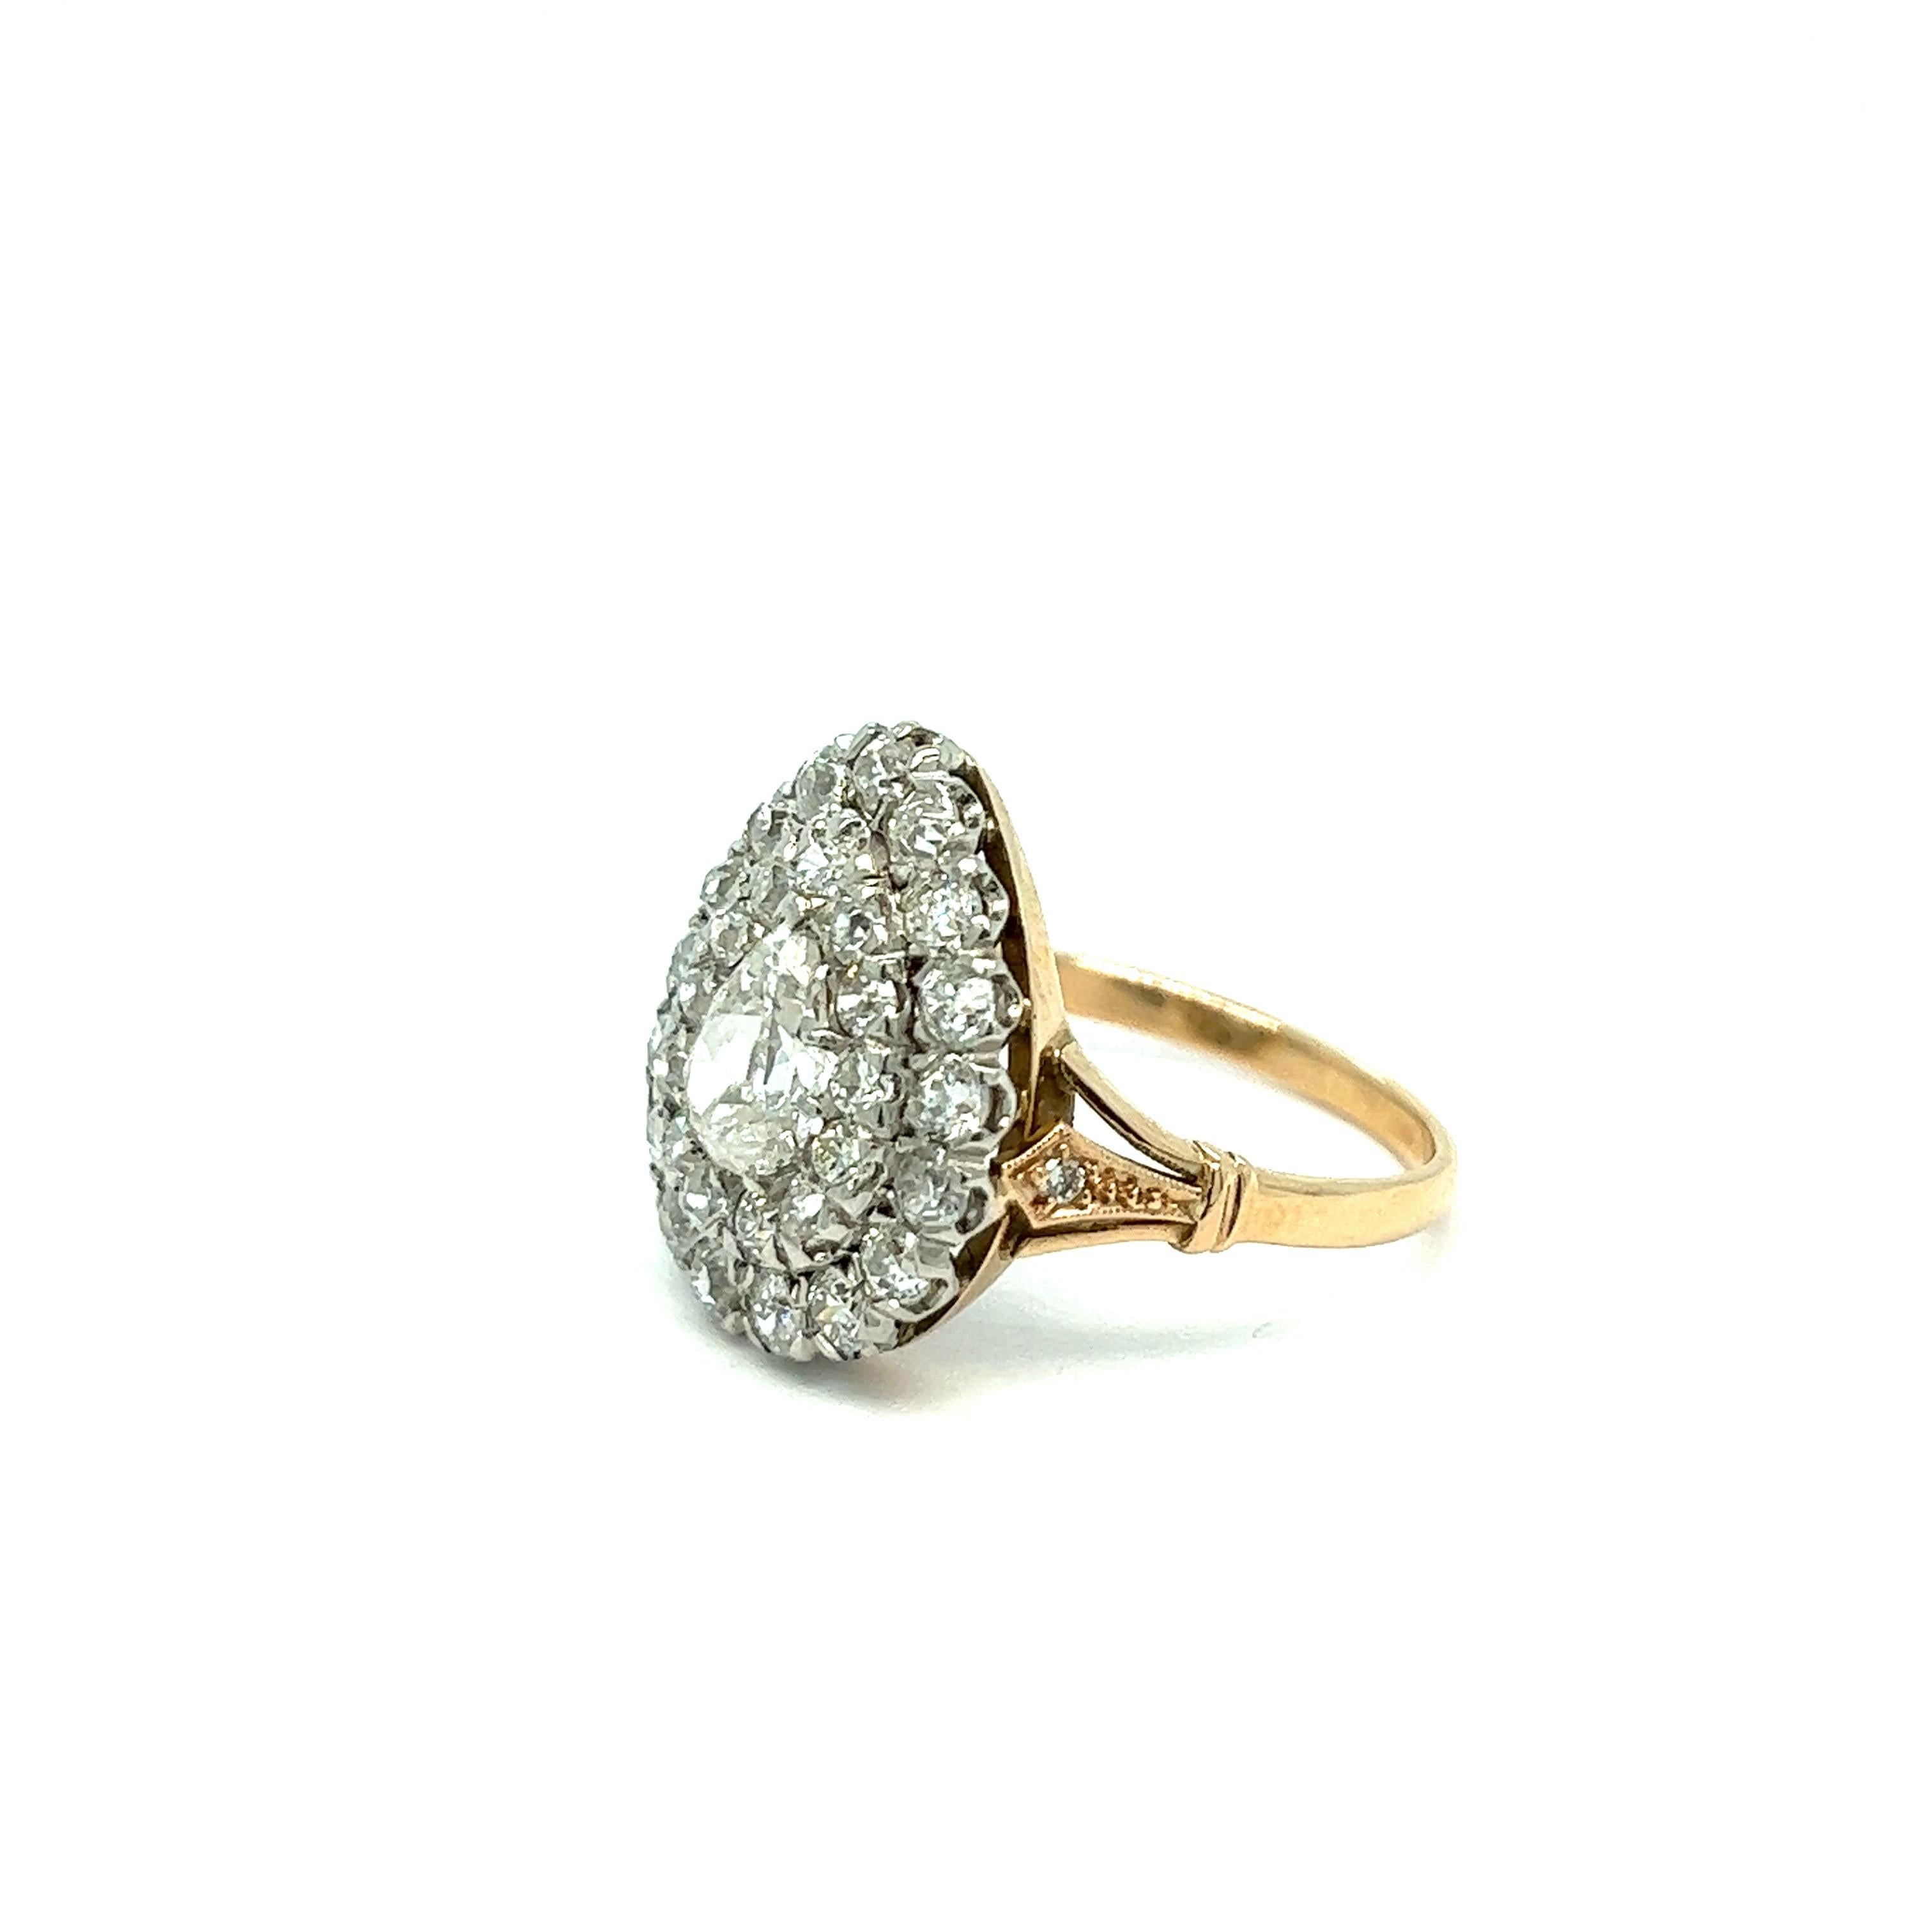 Antique gold platinum diamond ring

One old-mine pear-shaped diamond of approximately 0.75 carat, 30 old-mine cut diamonds of approximately 1.50 carats, 18 karat gold, platinum; marked 18k, Plat

Size: 6.5 US
Total weight: 5.3 grams